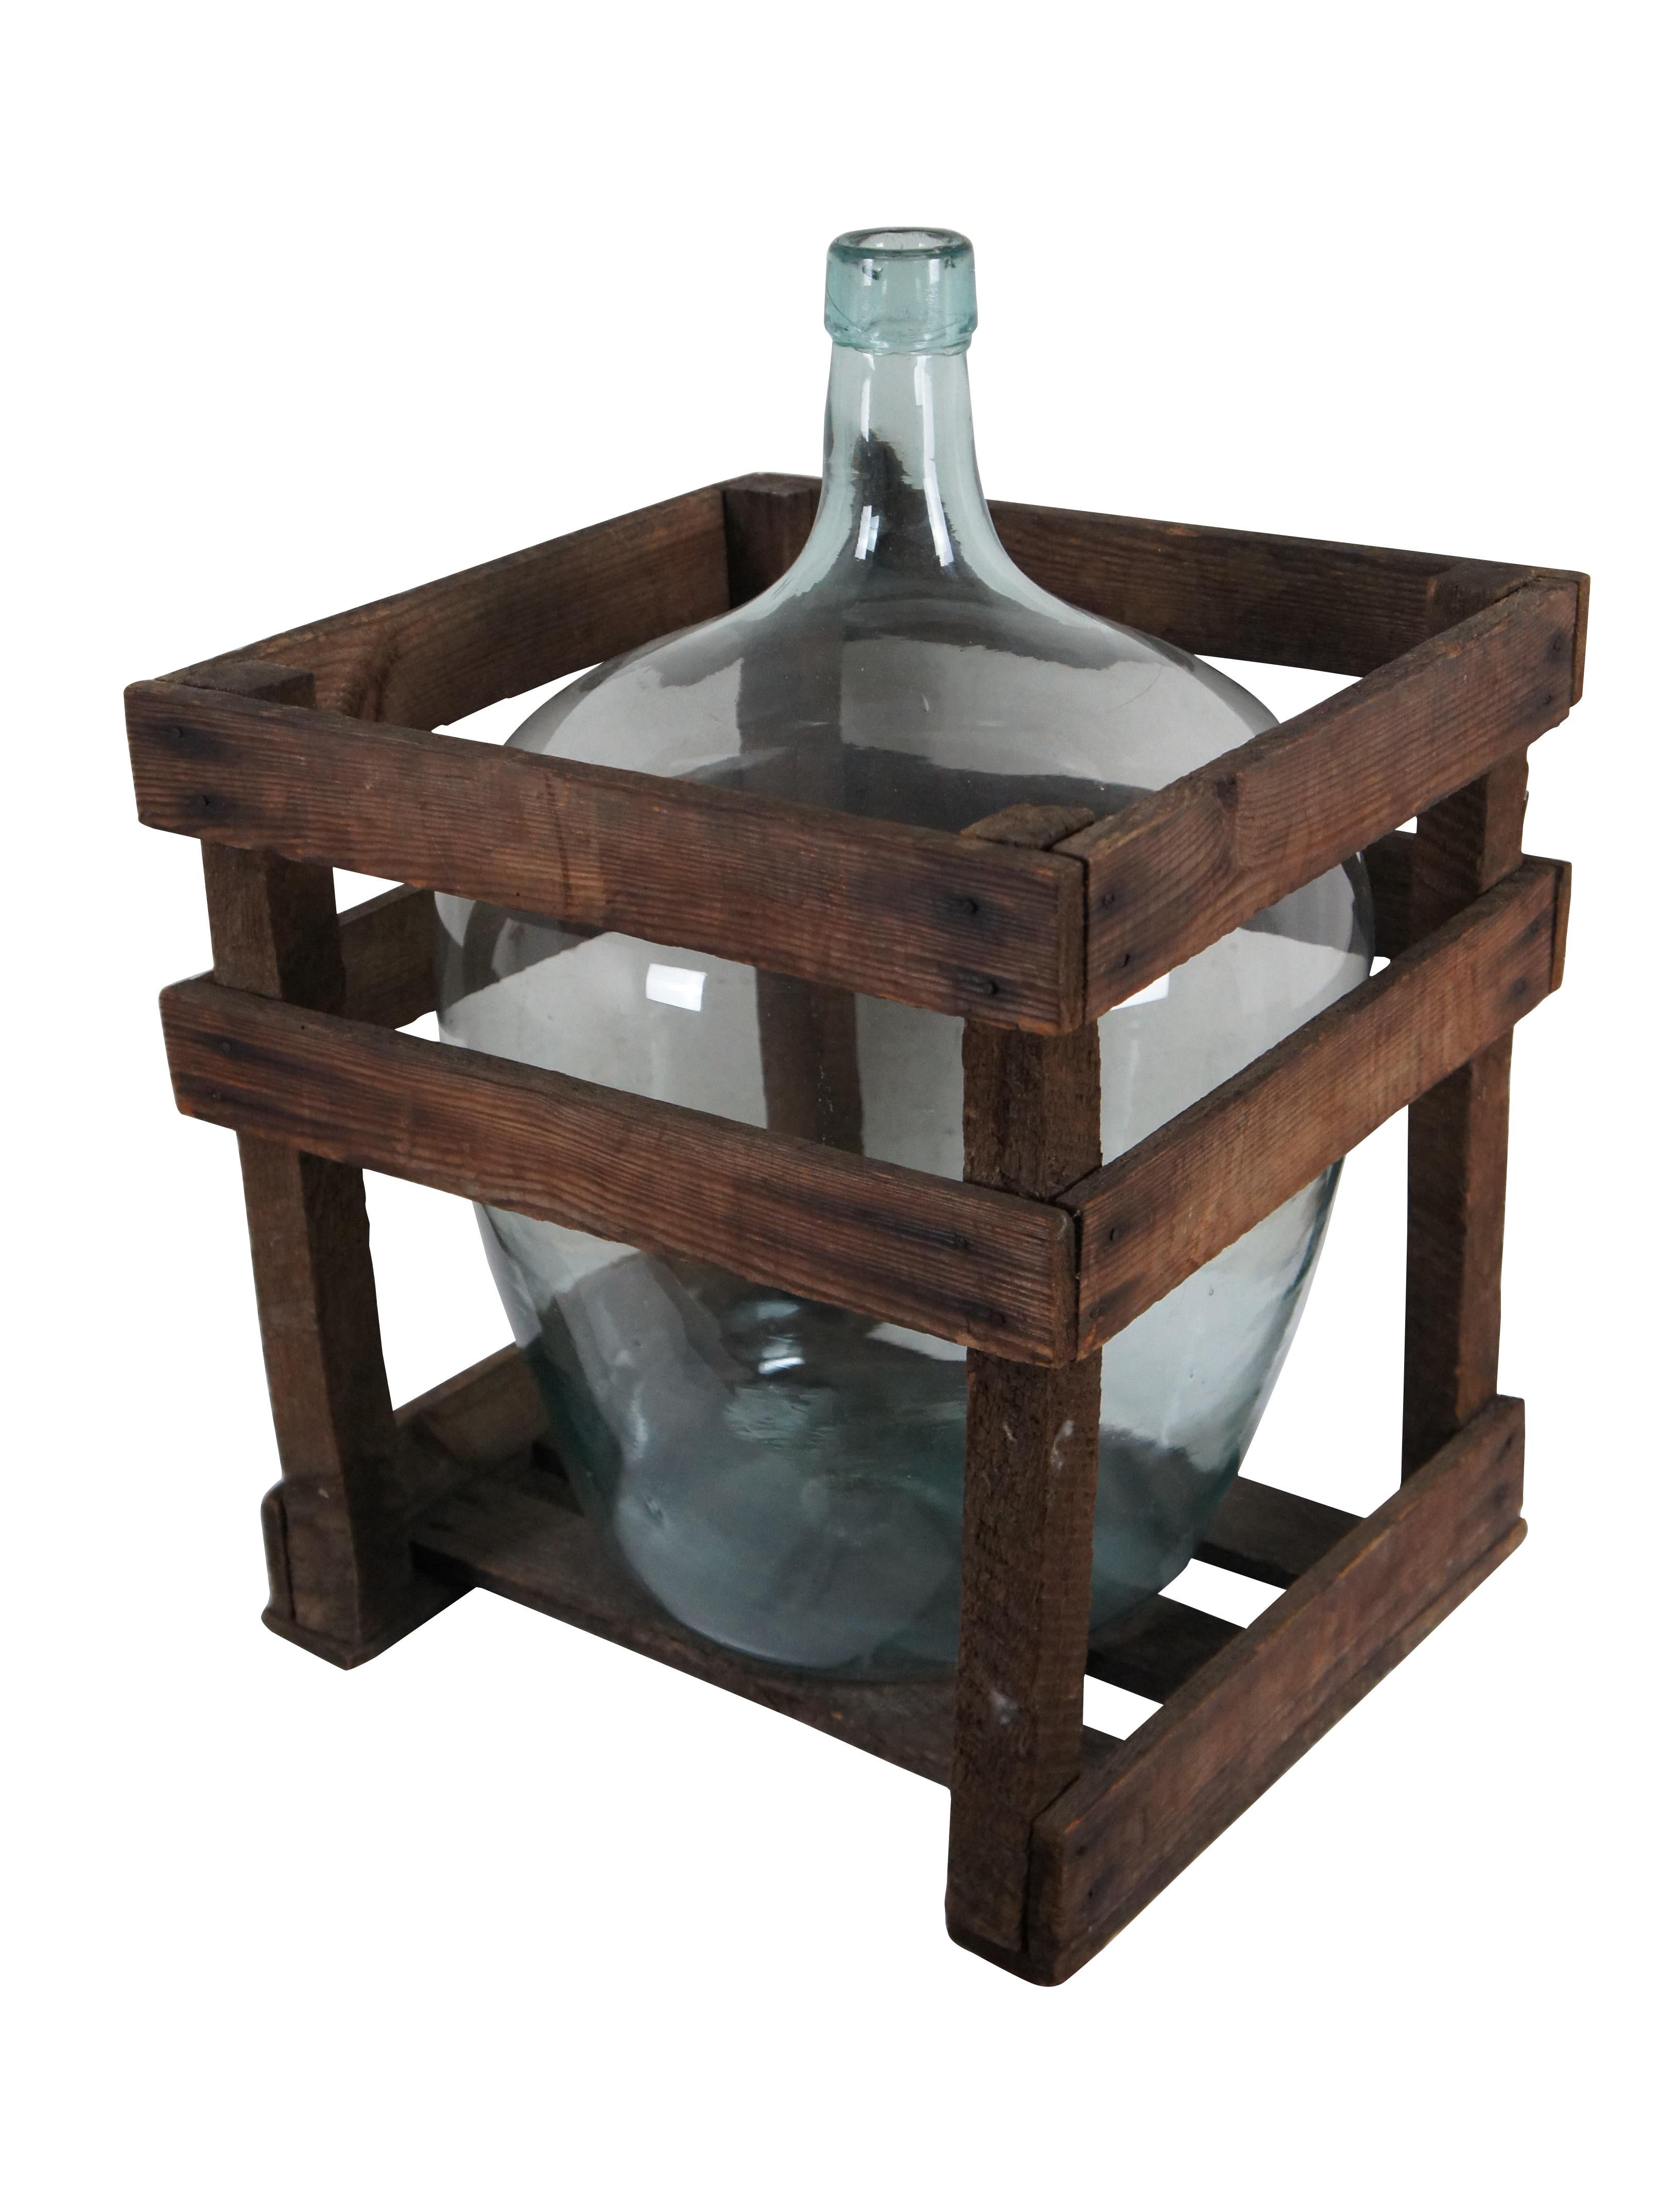 French Provincial Antique French Hand Blown Glass Demijohn Wine Bottle Jug & Wood Crate 22